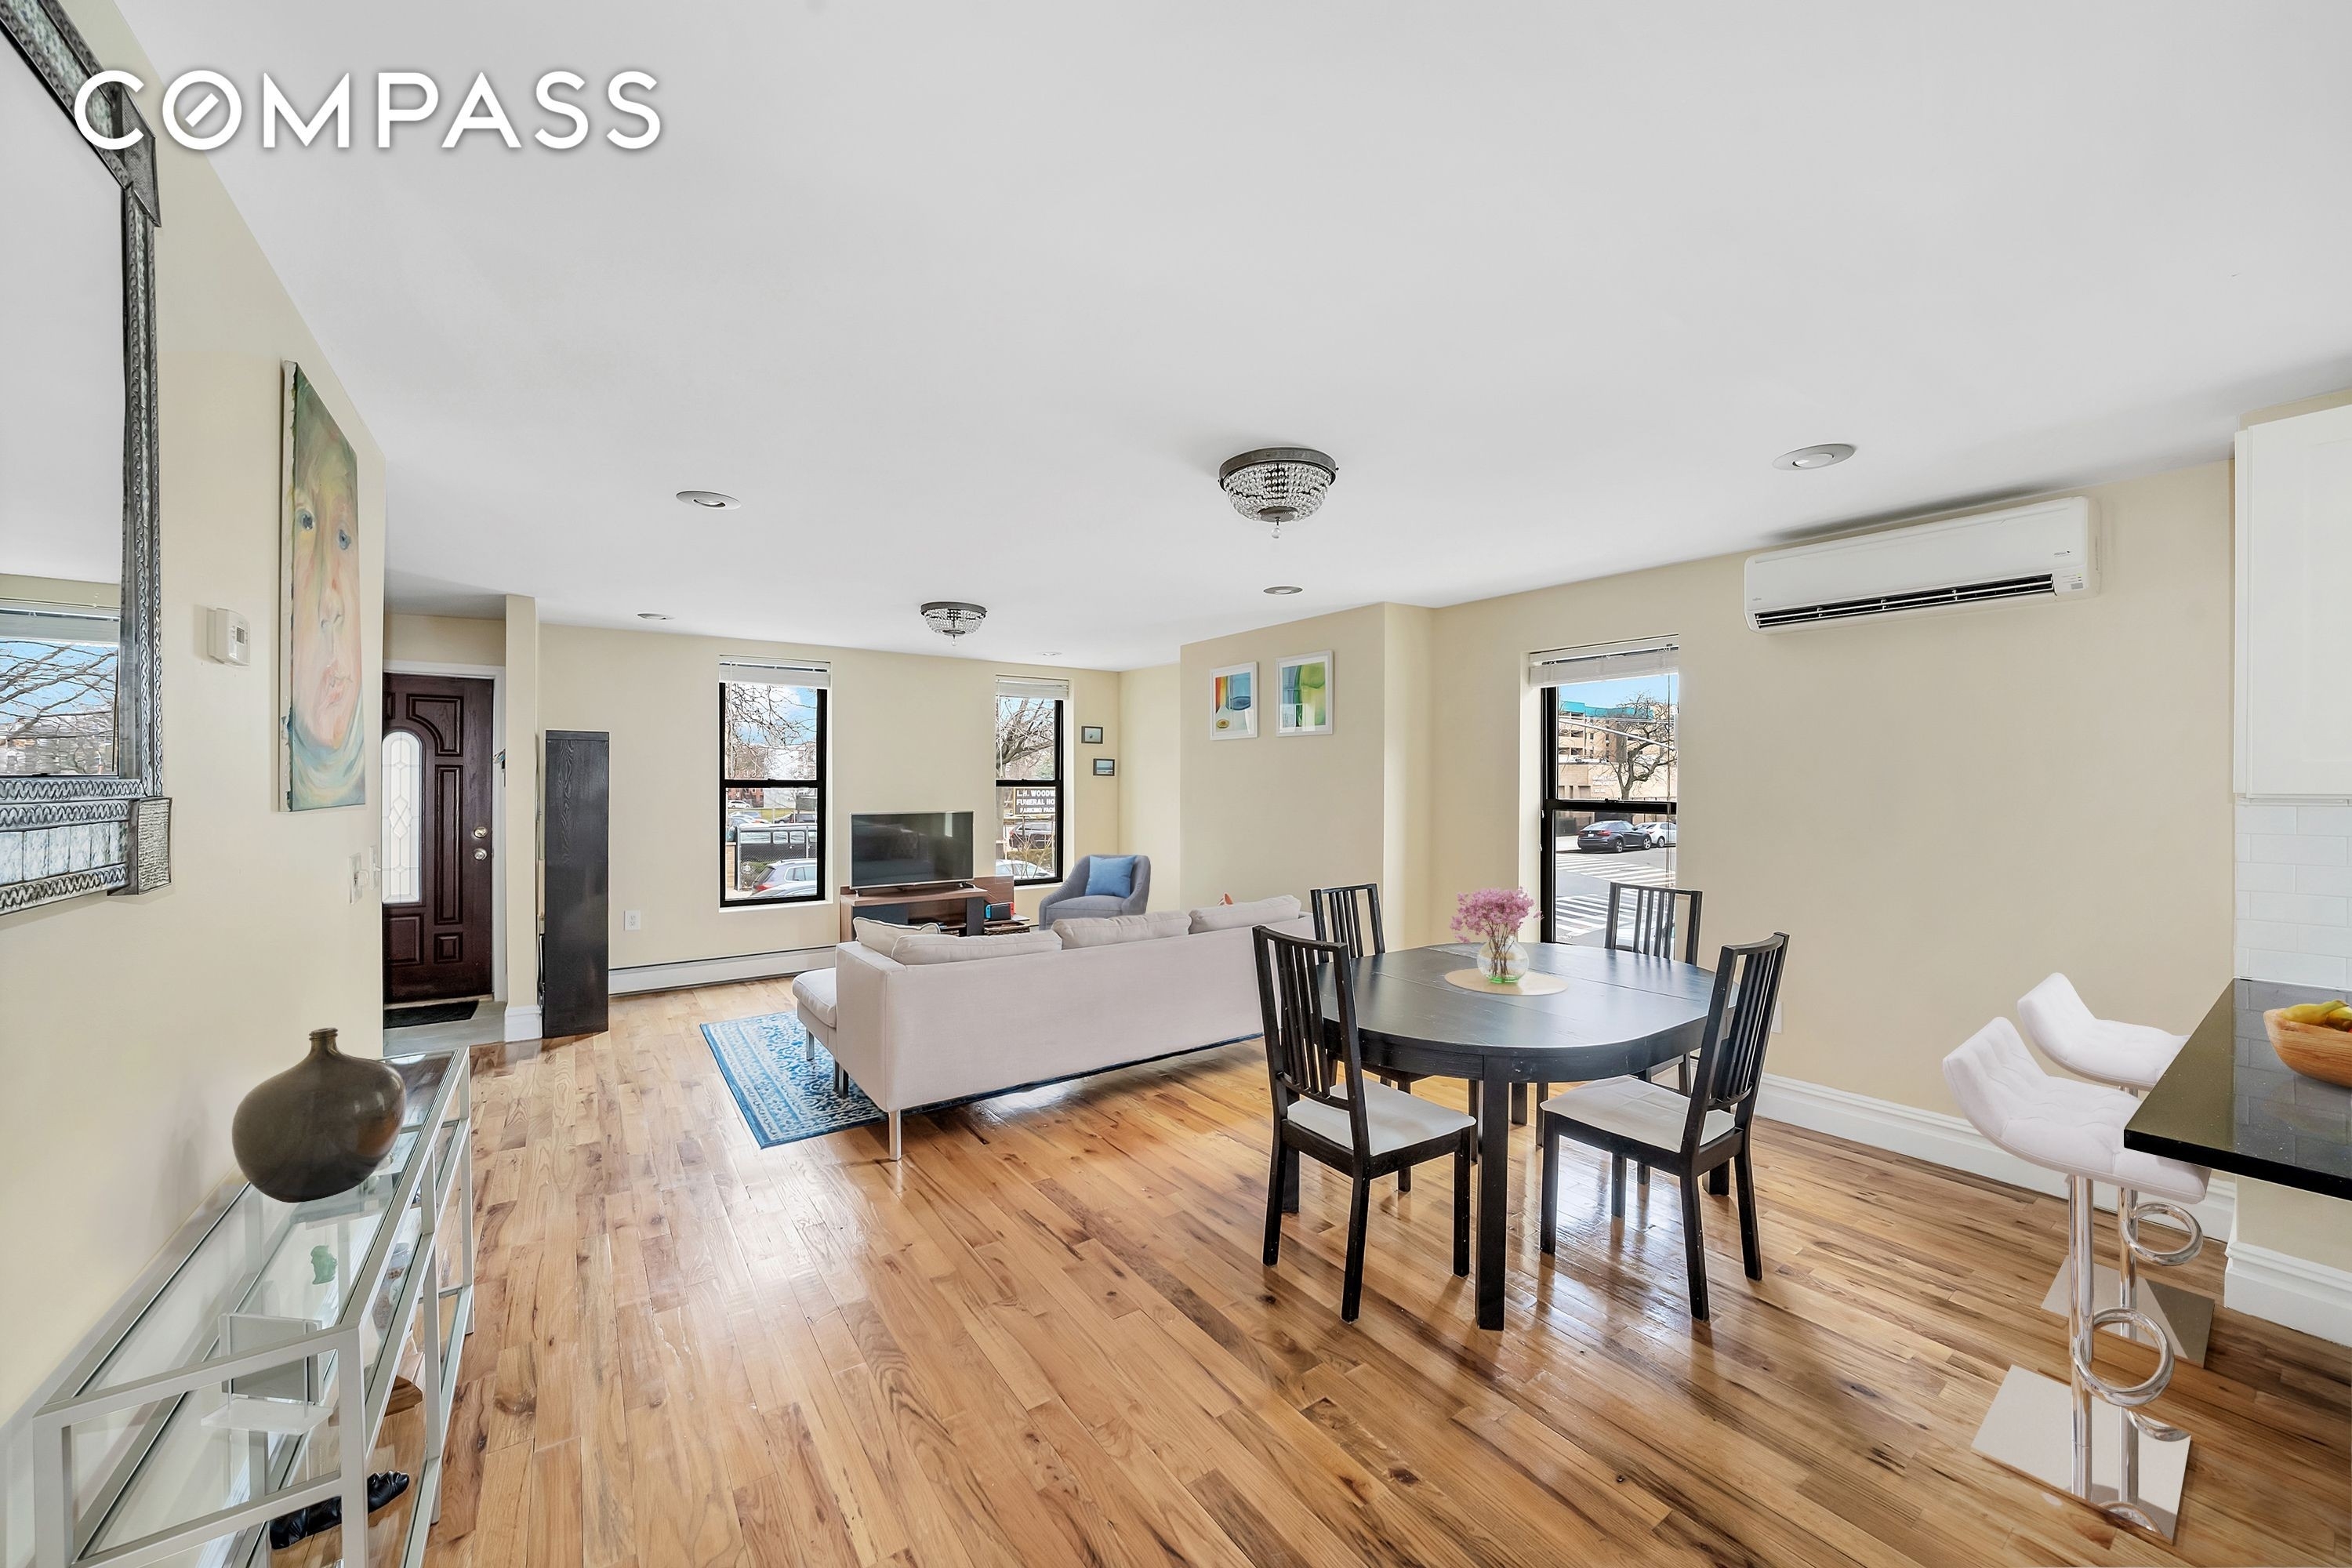 3. Single Family Townhouse for Sale at 532 HERKIMER ST, TOWNHOUSE Bedford Stuyvesant, Brooklyn, NY 11213